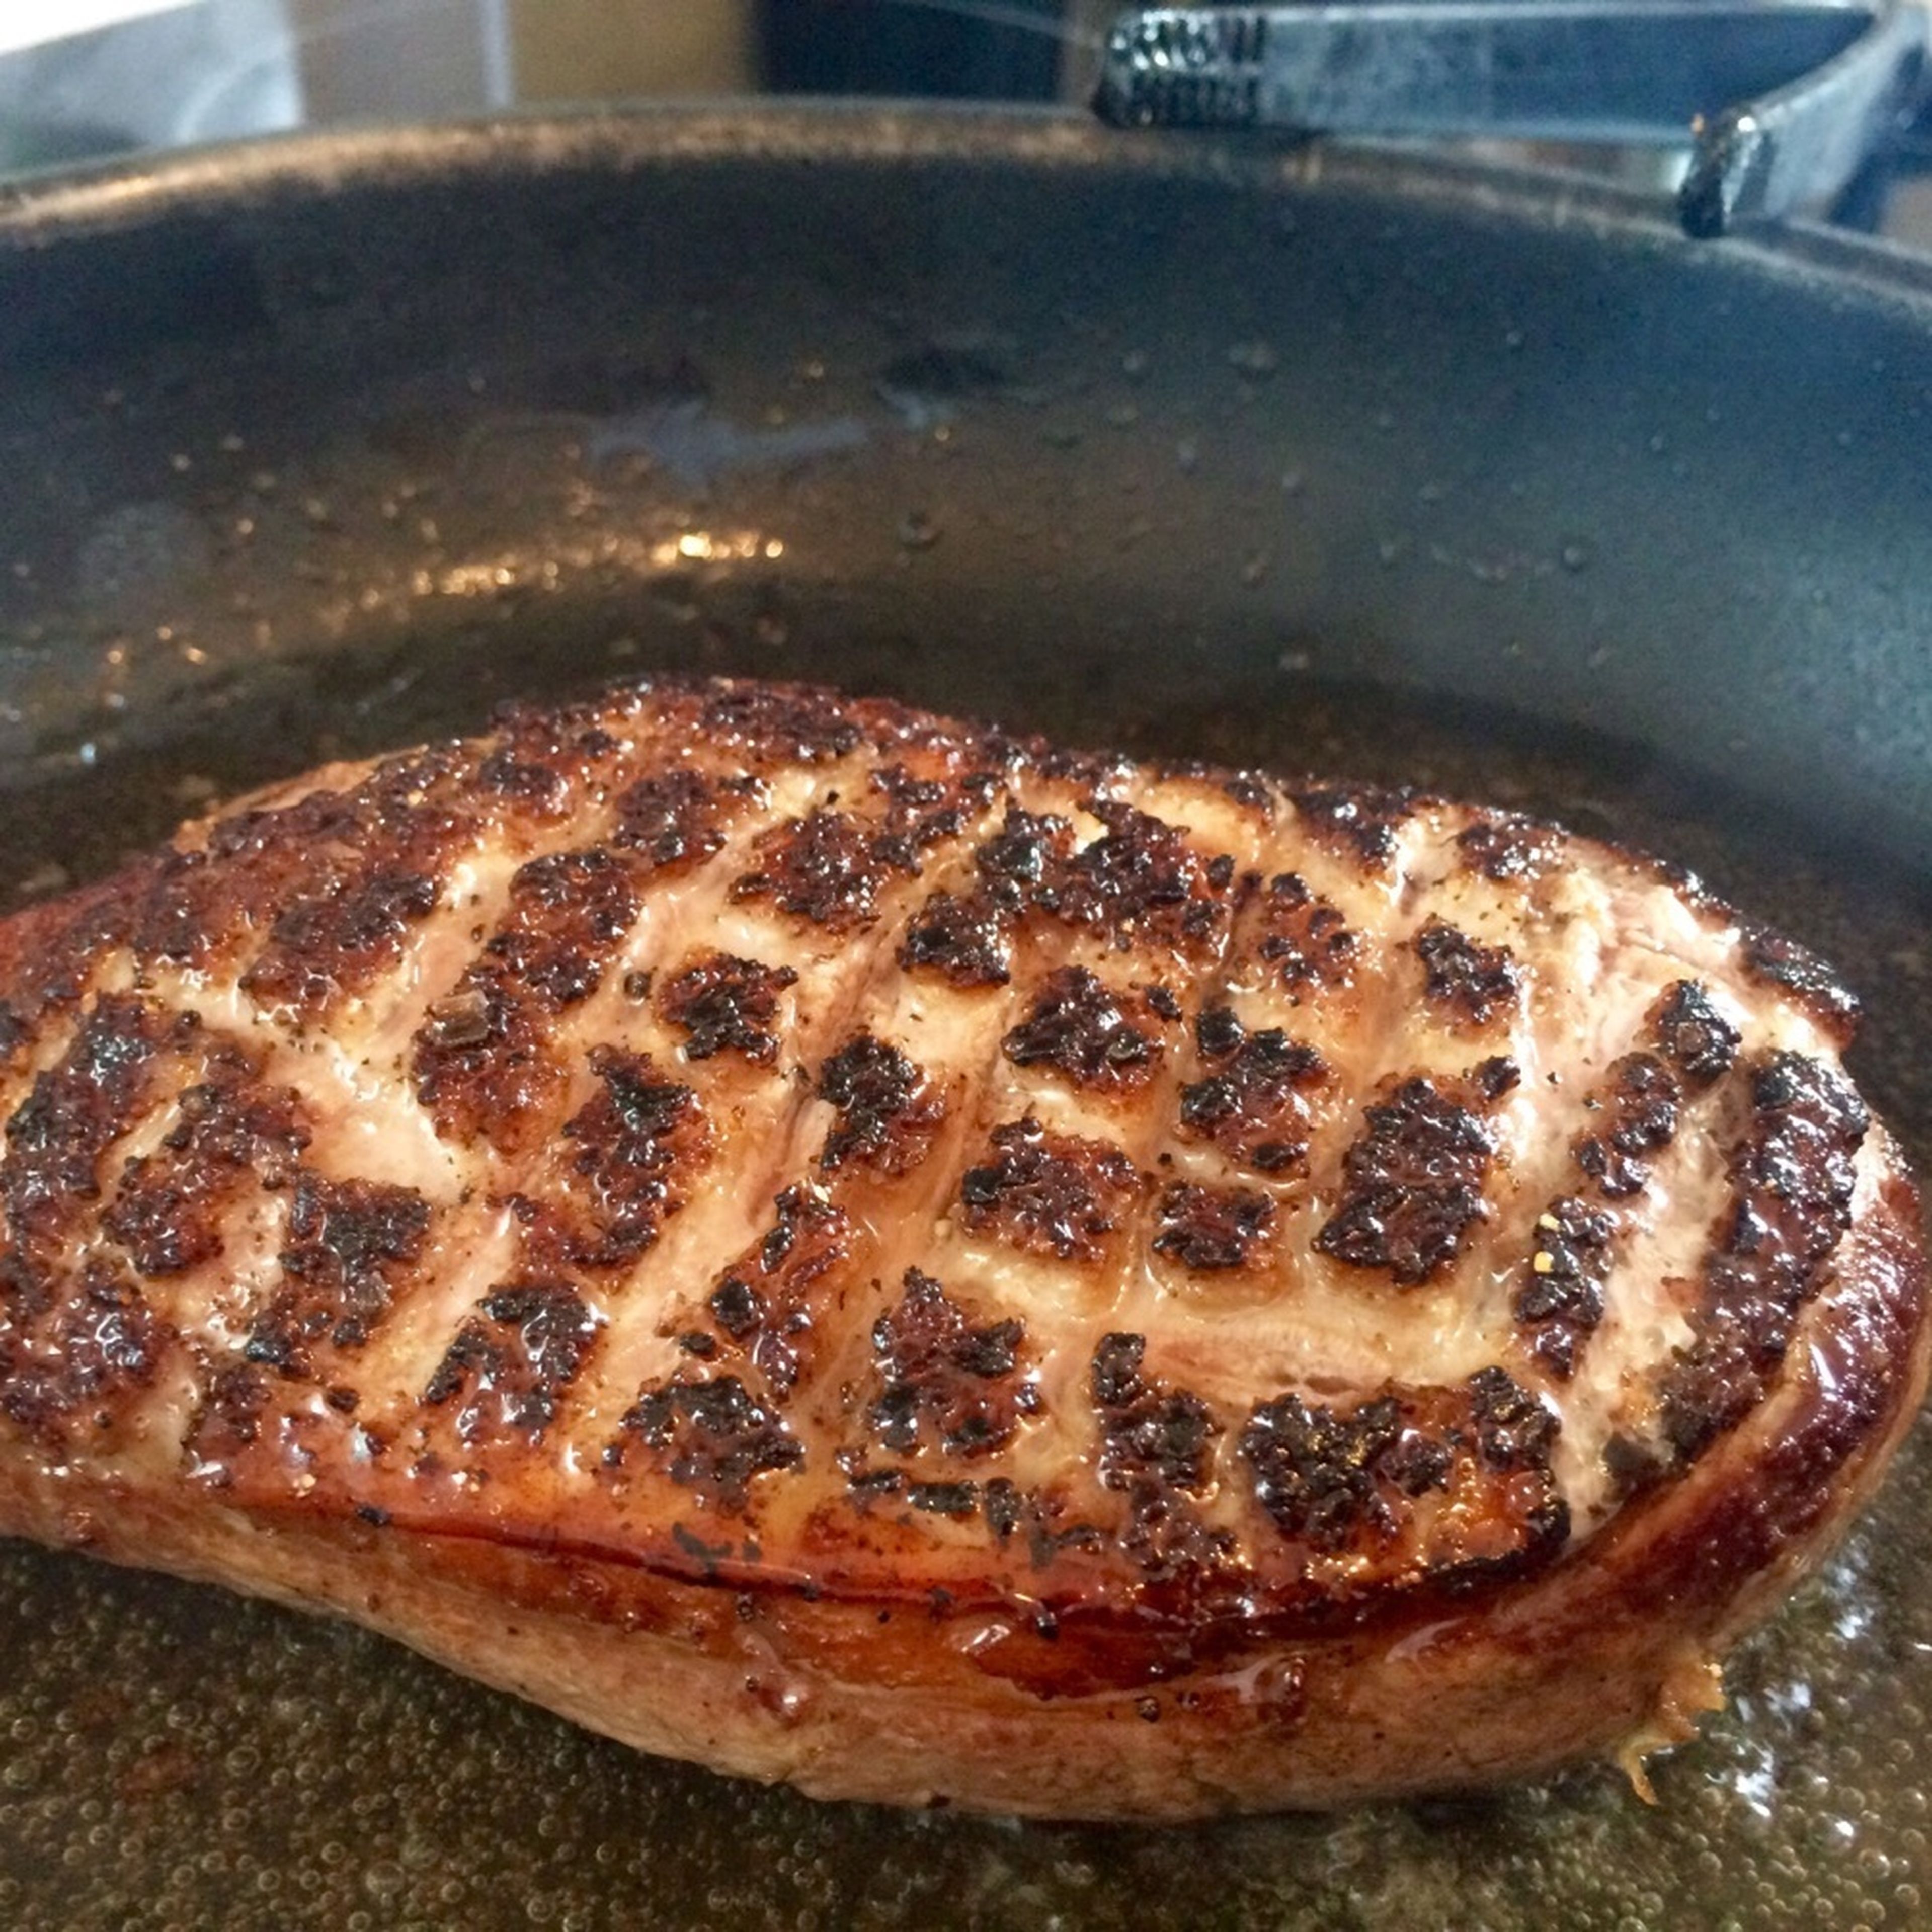 Fry skin side in oil until more or less crispy (depending on the size of the duck breast, approx. 2 min. on each side at medium heat).